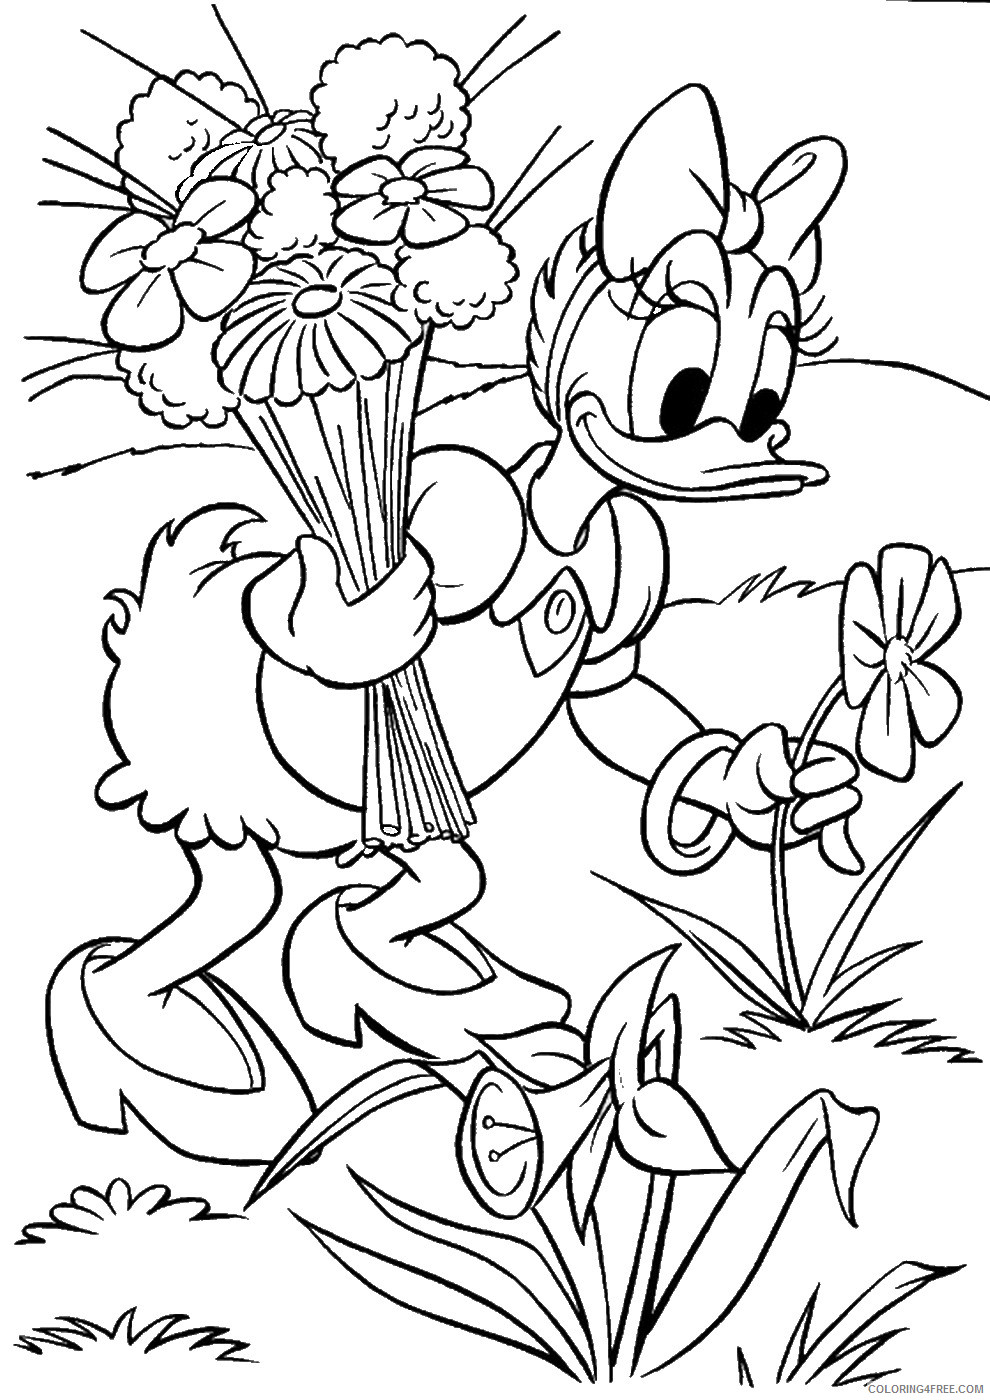 Daisy Duck Coloring Pages Cartoons donald_22 Printable 2020 2019 Coloring4free